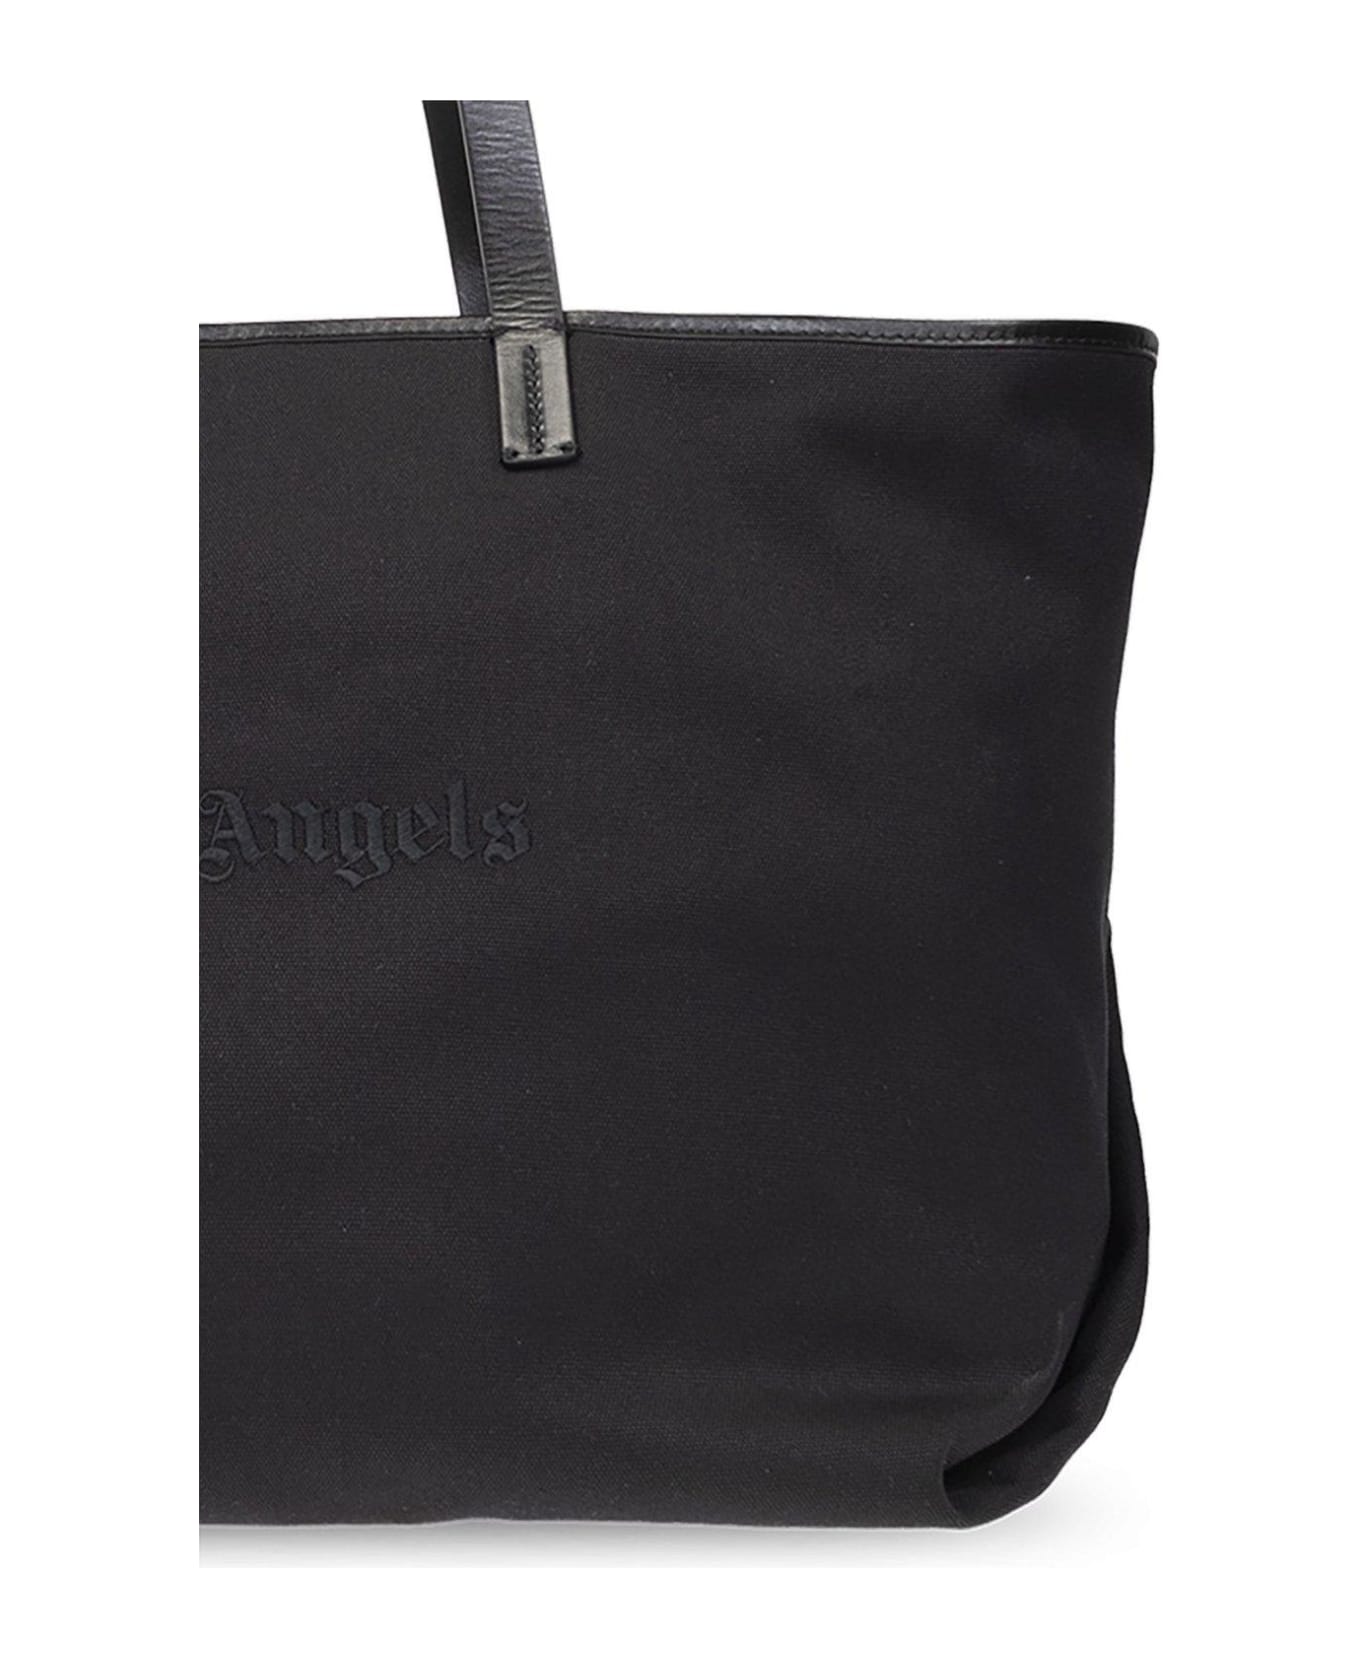 Palm Angels Logo Embroidered Tote Bag